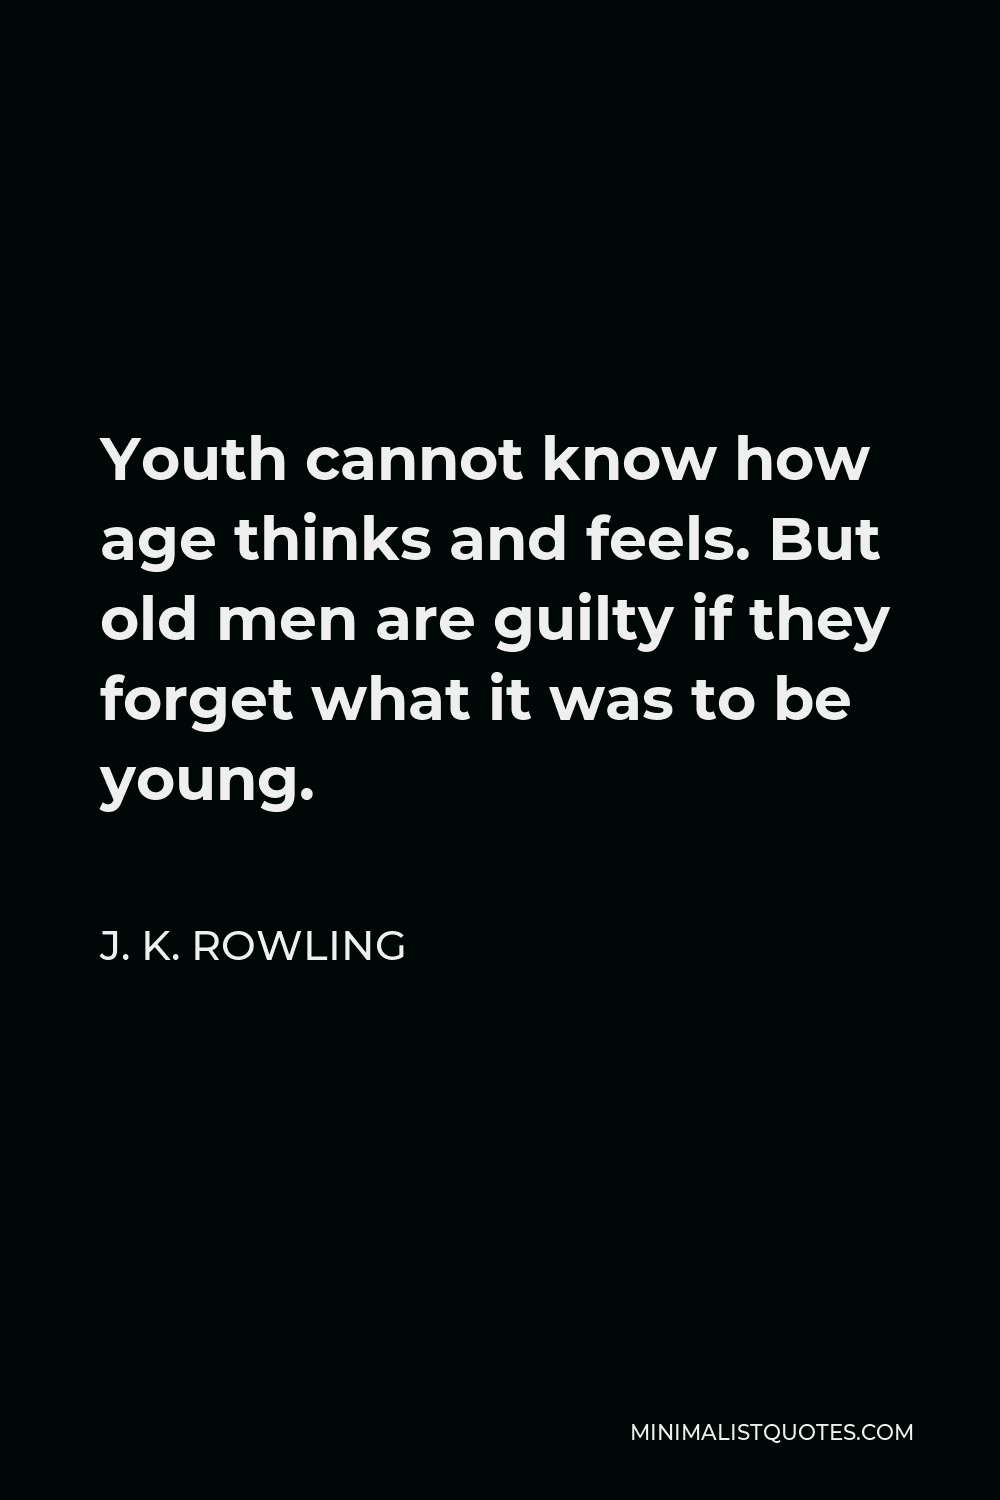 J. K. Rowling Quote - Youth cannot know how age thinks and feels. But old men are guilty if they forget what it was to be young.